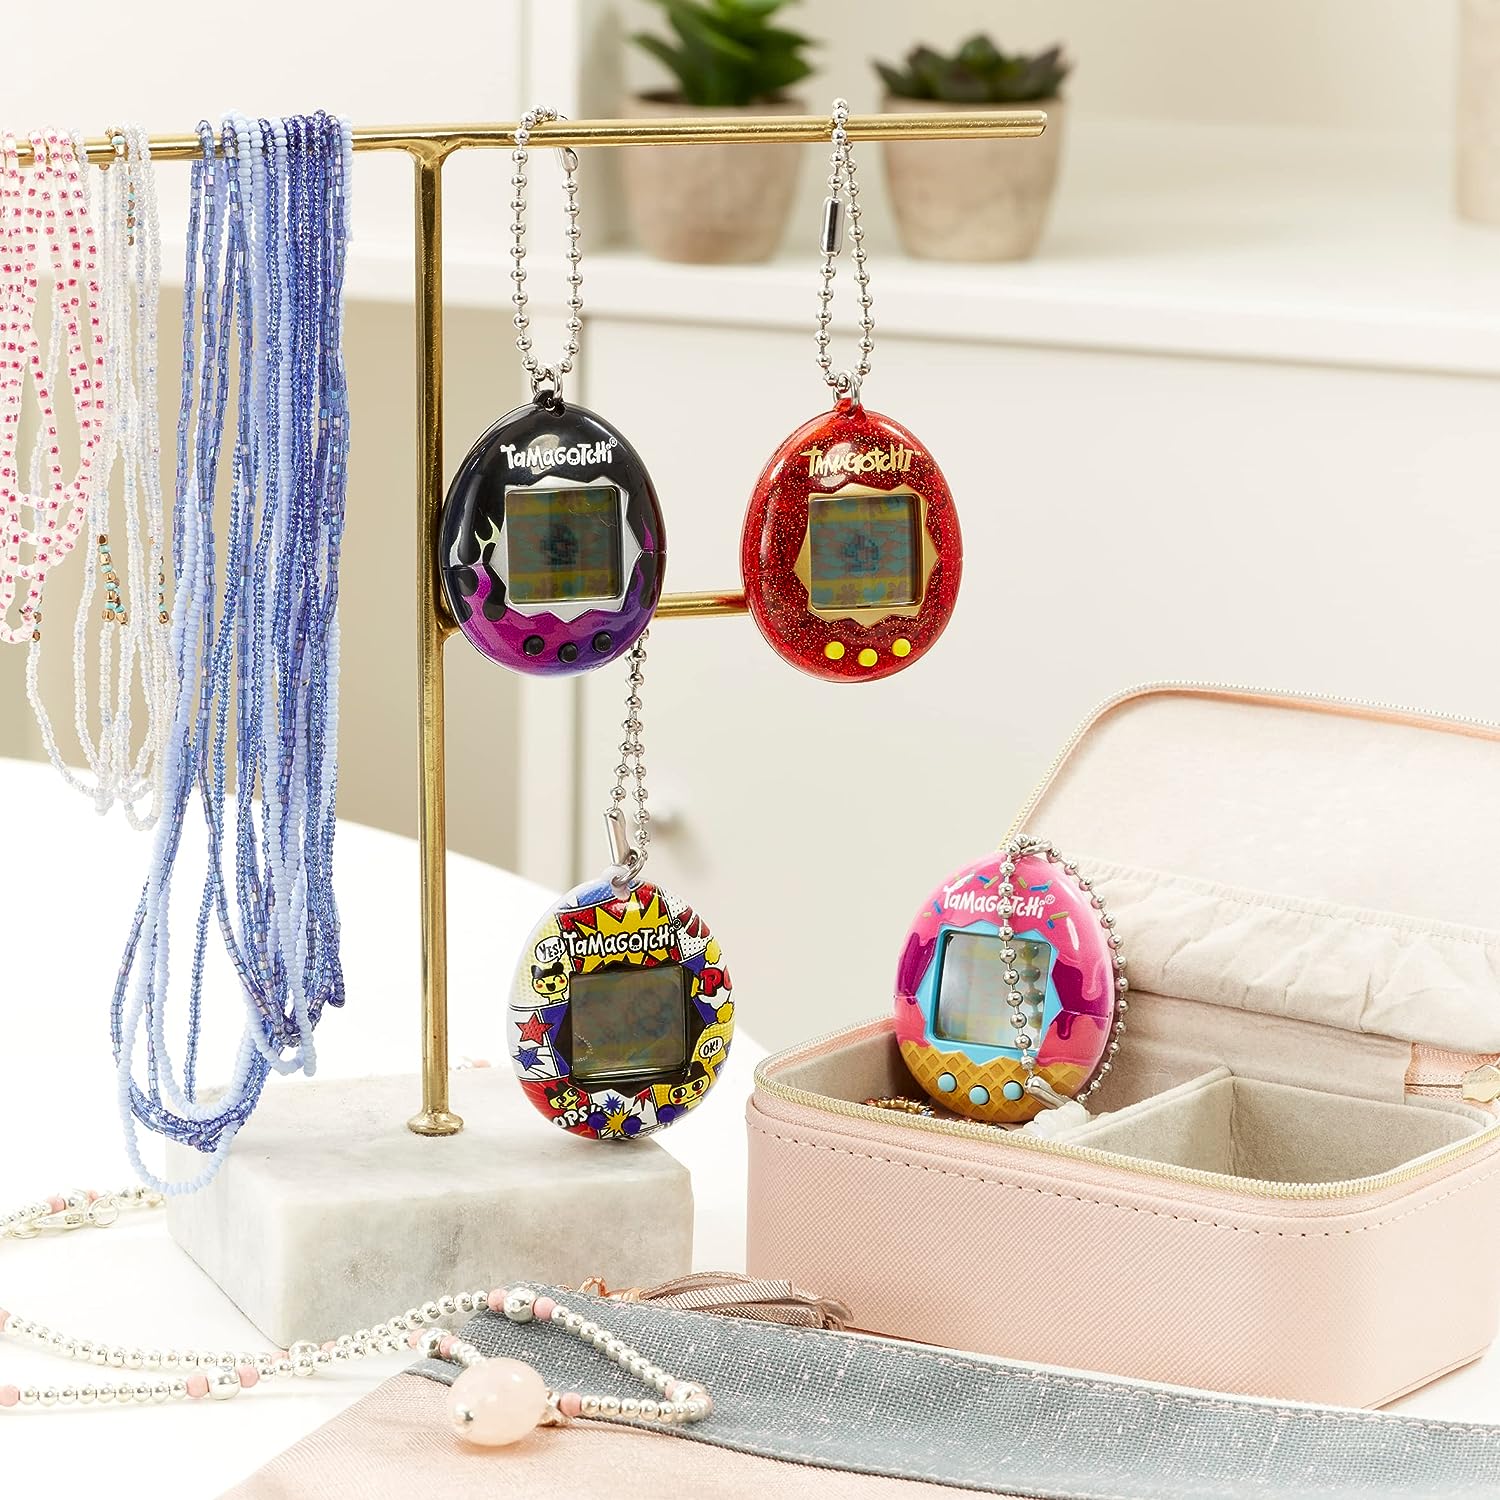 Tamagotchi Galaxy-Feed, Care, 42815 Original, Nurture-Virtual Pet with Chain for on The go Play